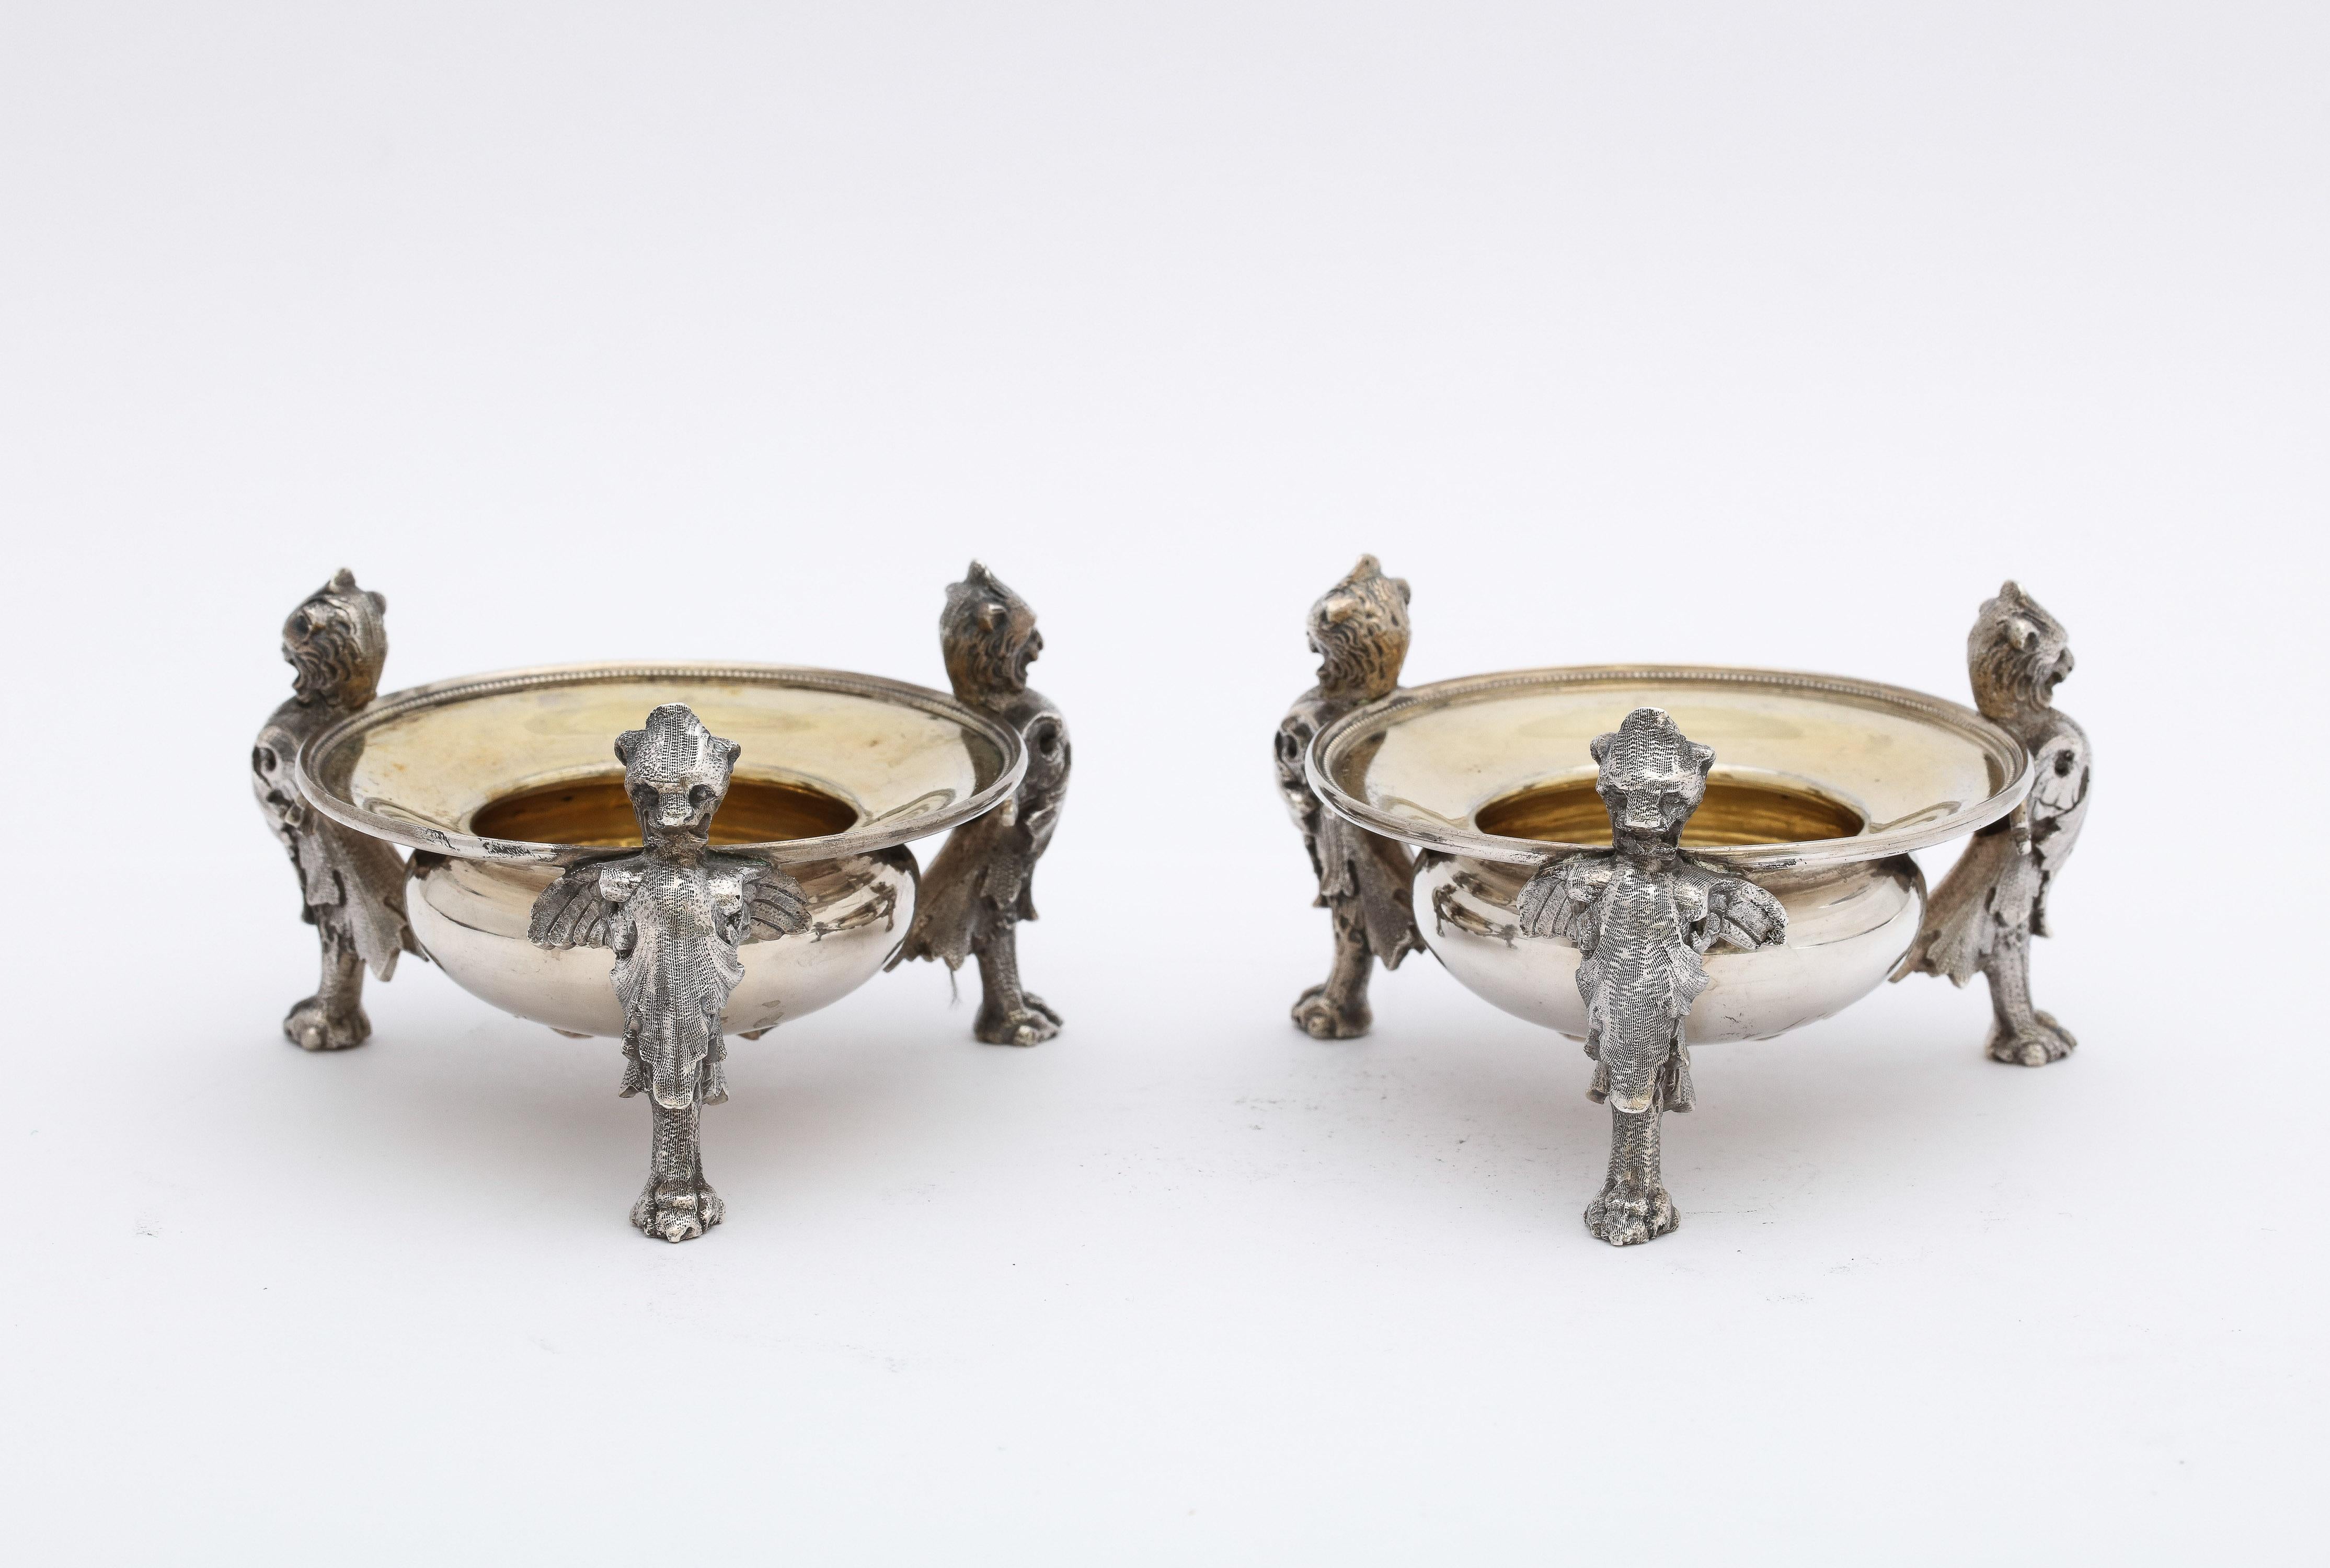 Pair of Neoclassical-Style Parcel Gilt Coin Silver Footed Salt Cellars By Gorham In Good Condition For Sale In New York, NY